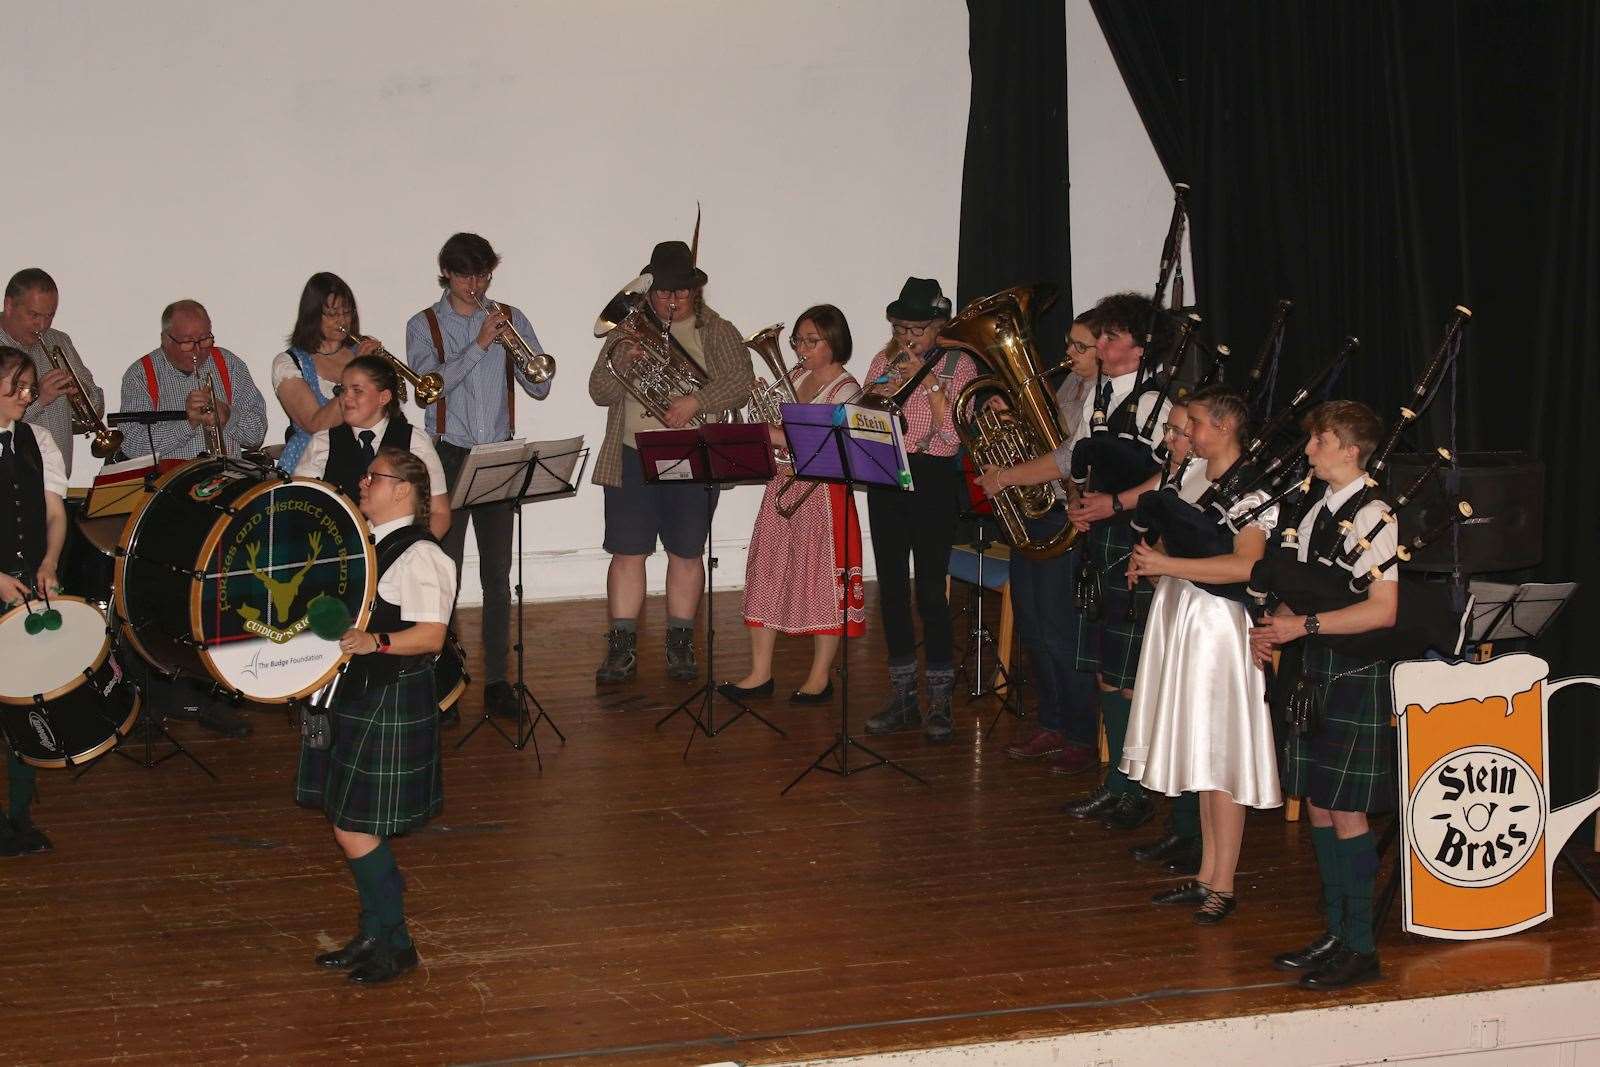 Stein Brass joined with members of Forres and District Pipe Band to play Highland Cathedral.